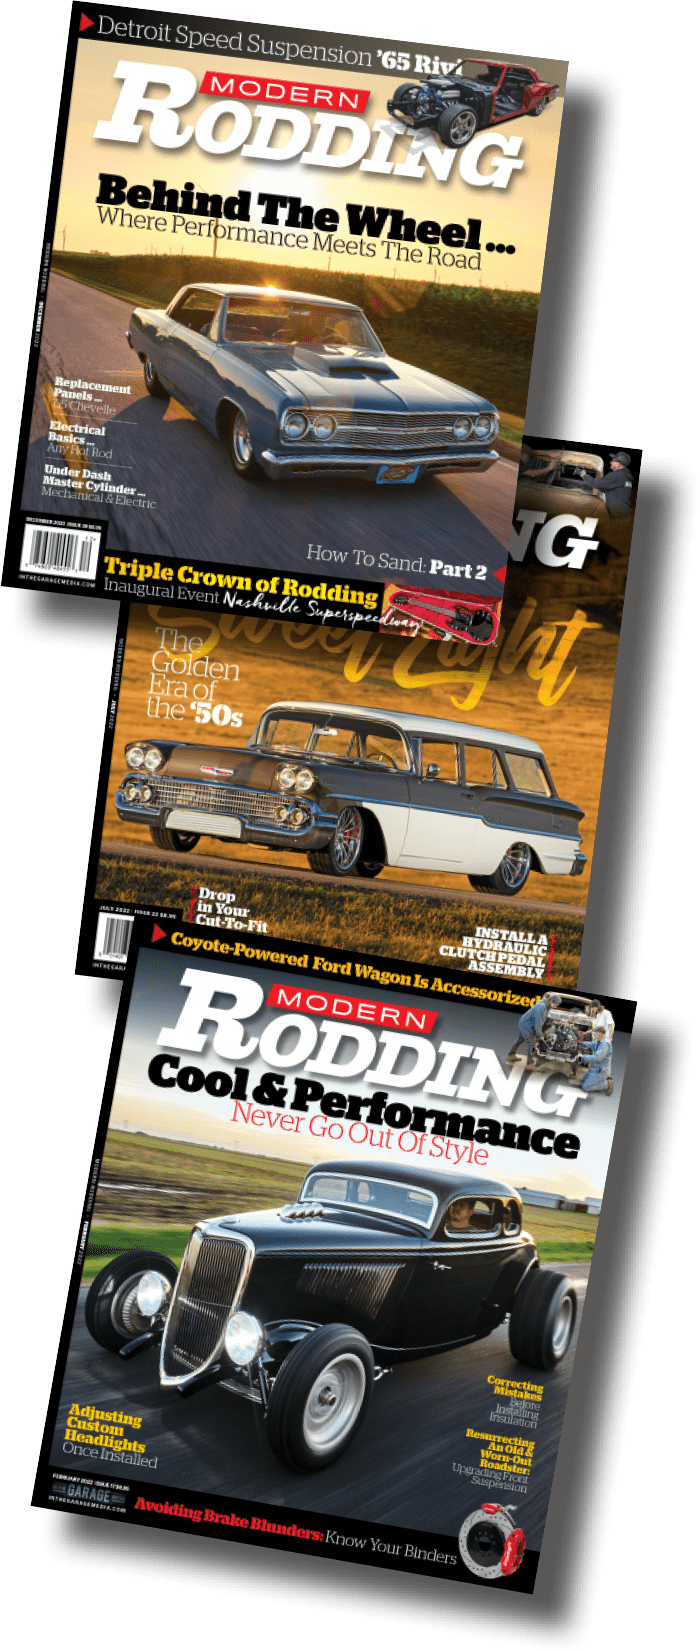 previous Modern Rodding covers